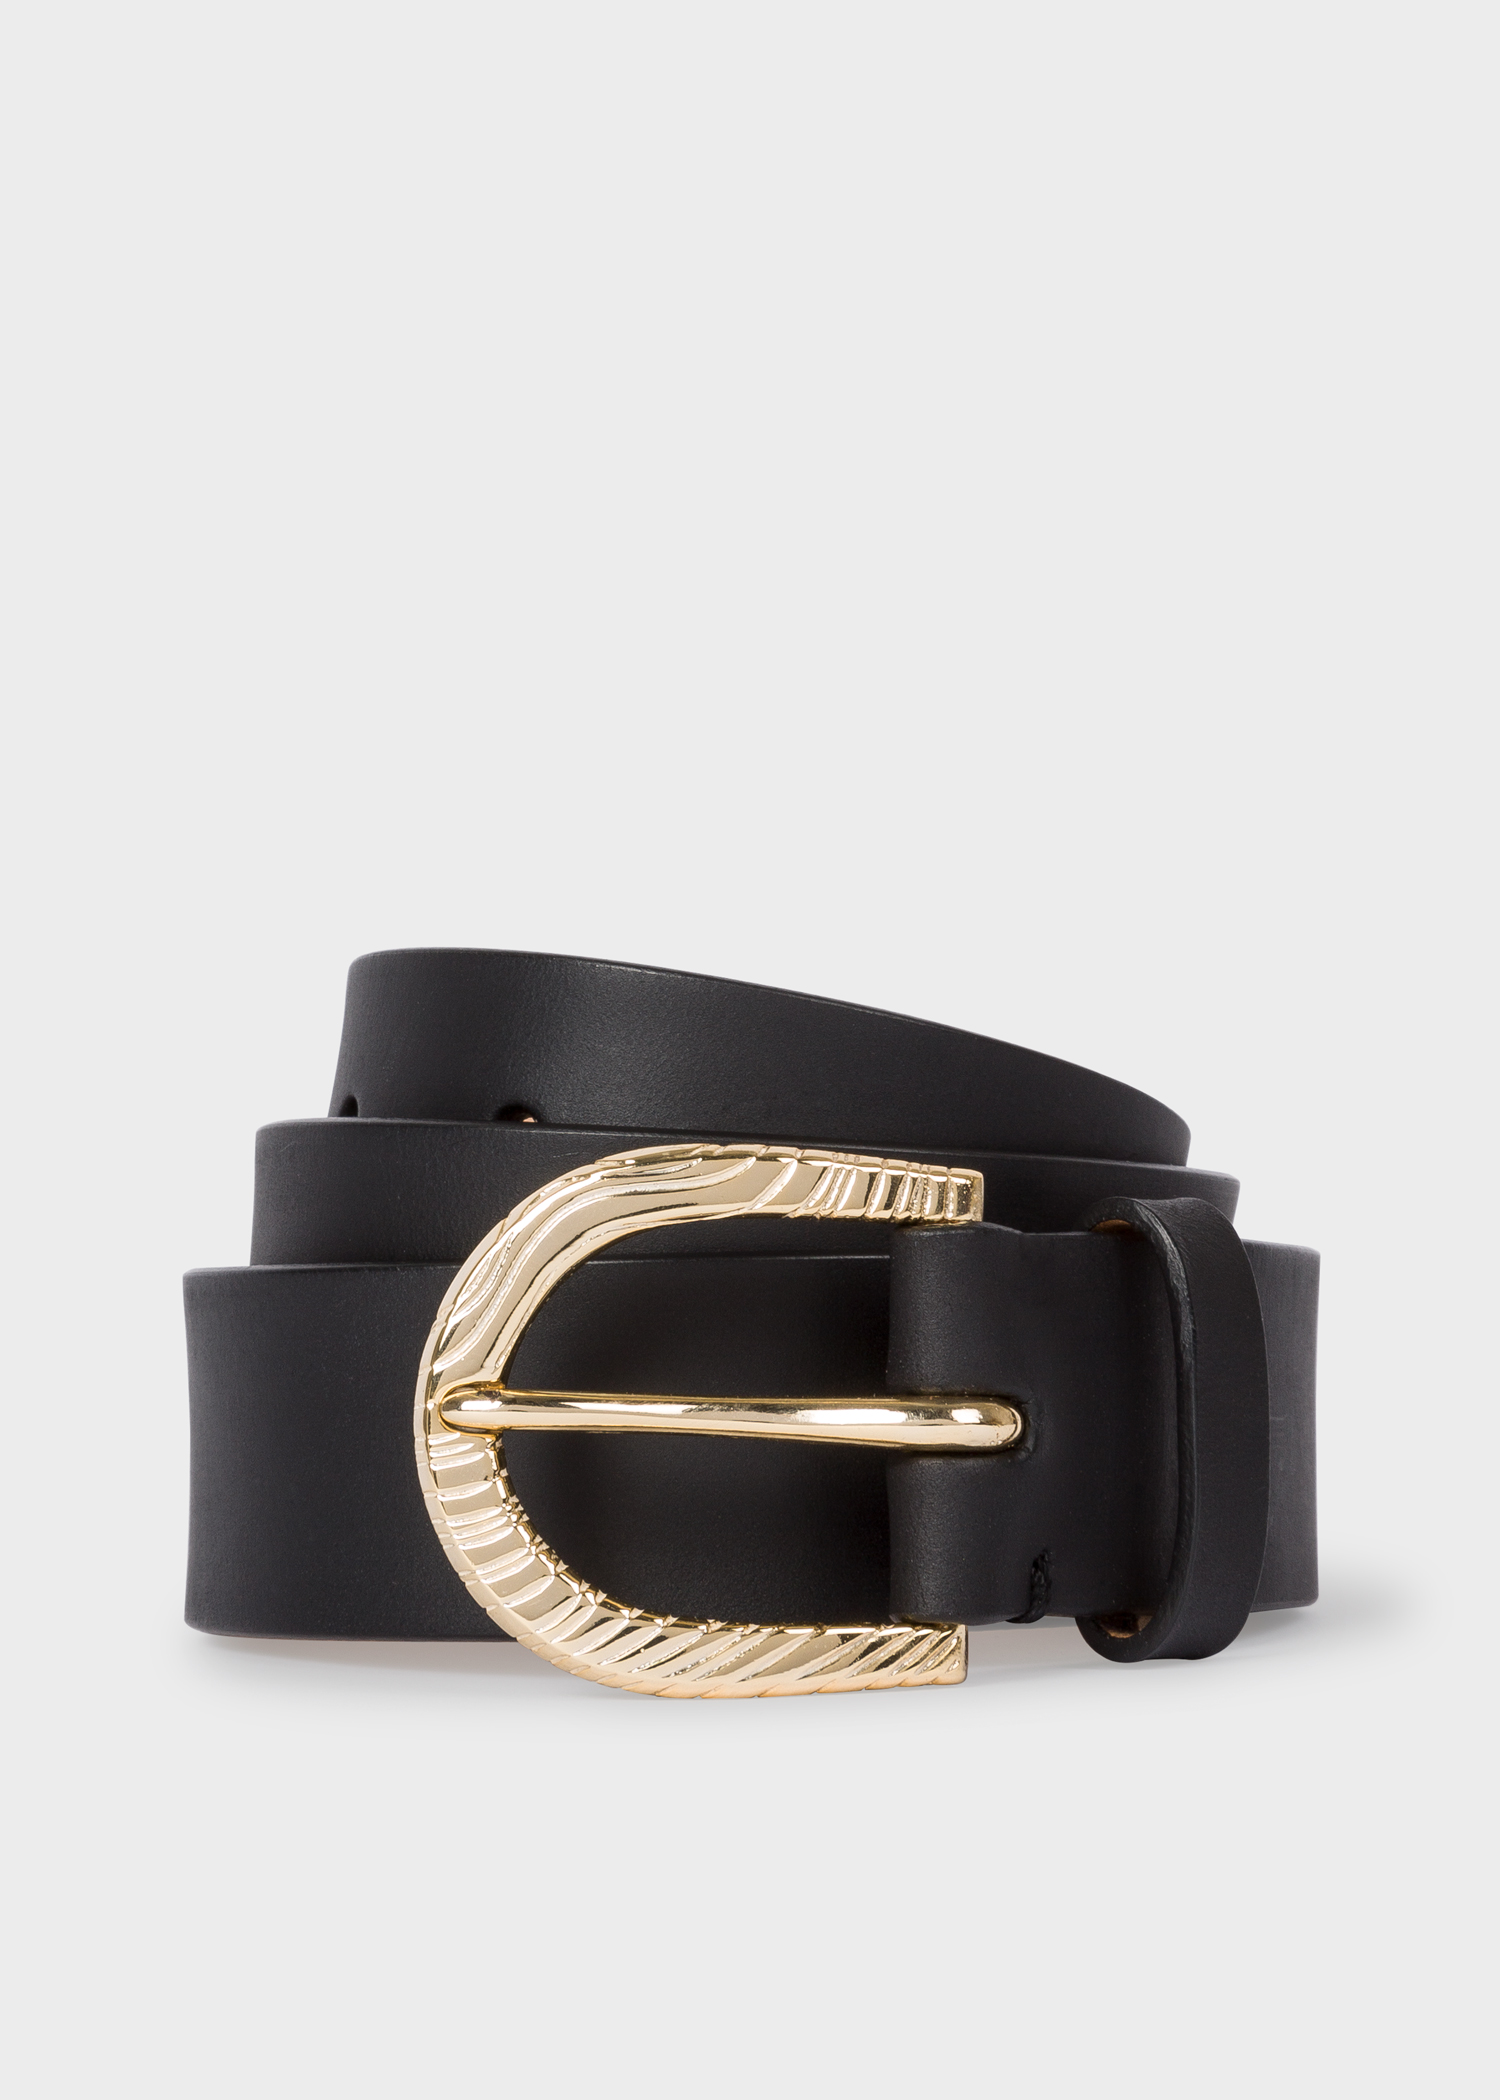 Front view - Women's Black Leather Belt With 'Swirl' Embossed Buckle Paul Smith